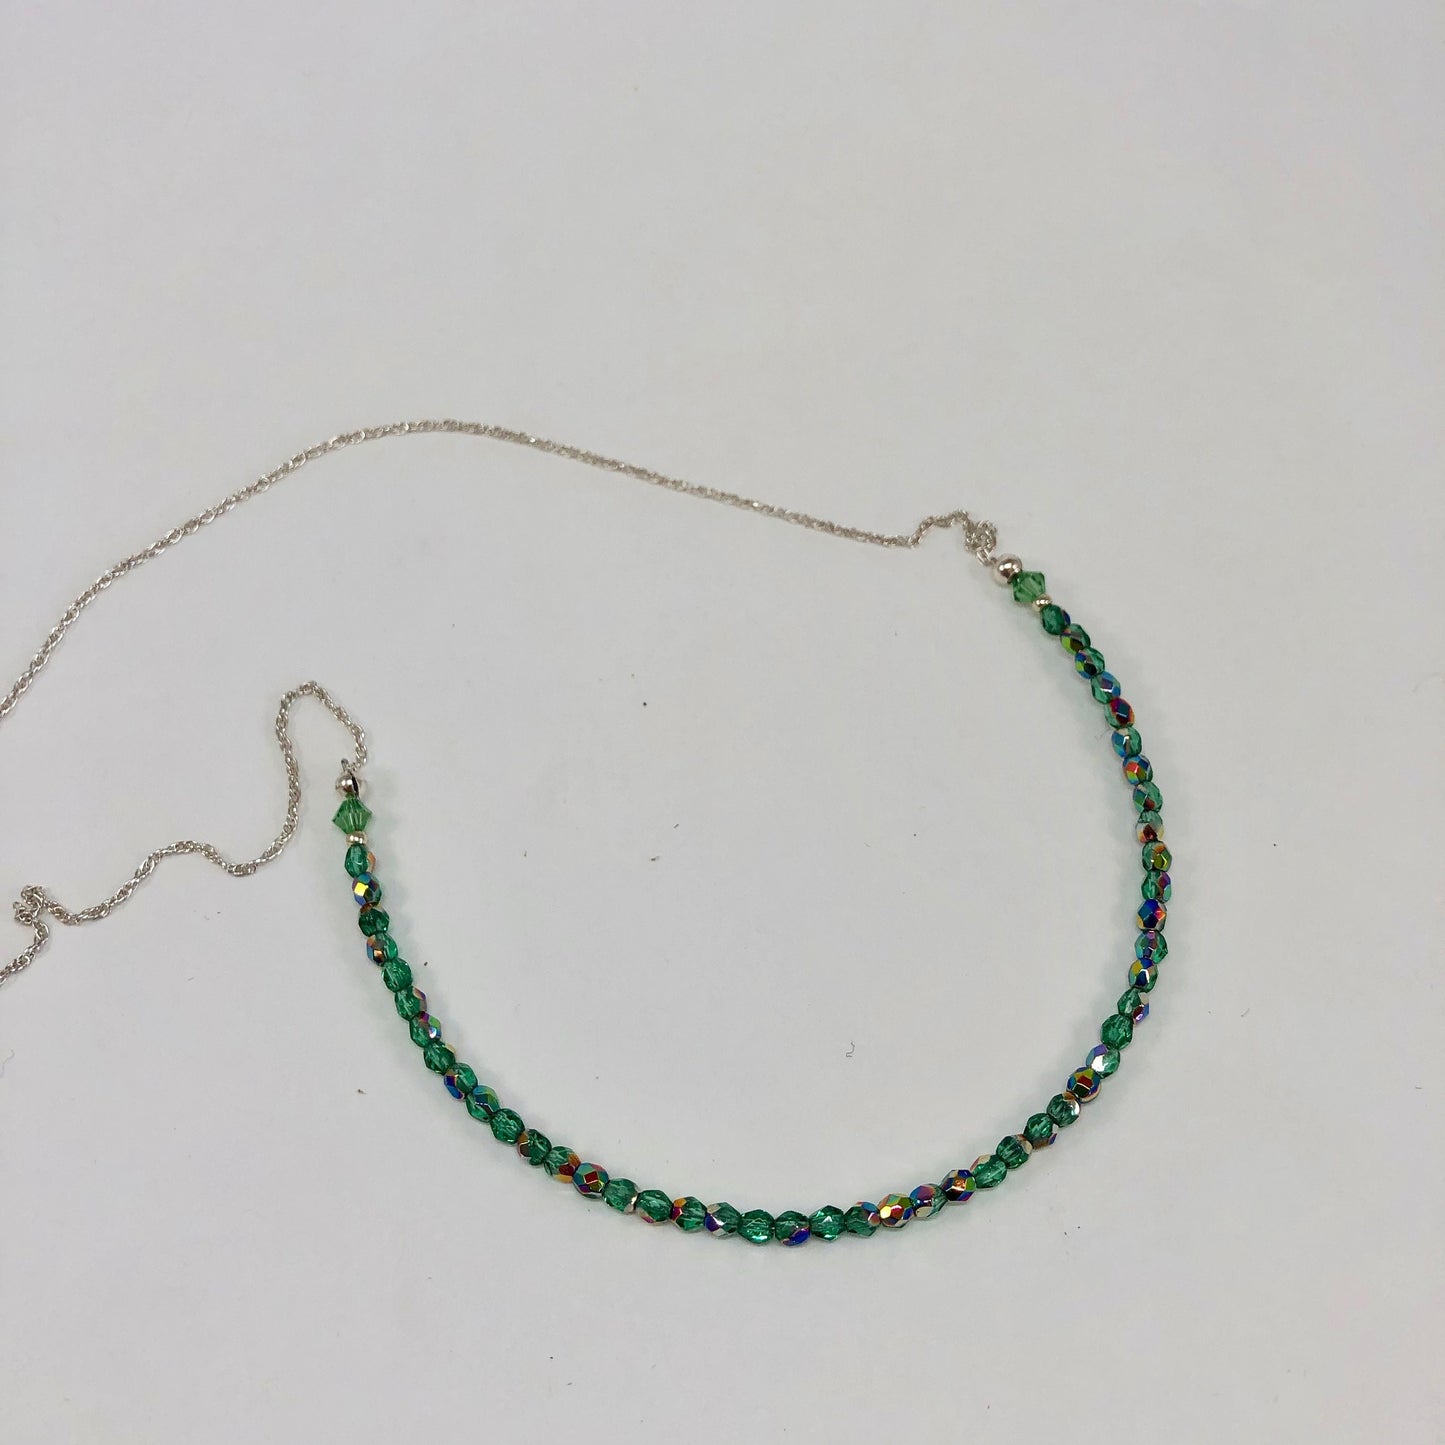 Emerald green crystal and sterling silver choker necklace.